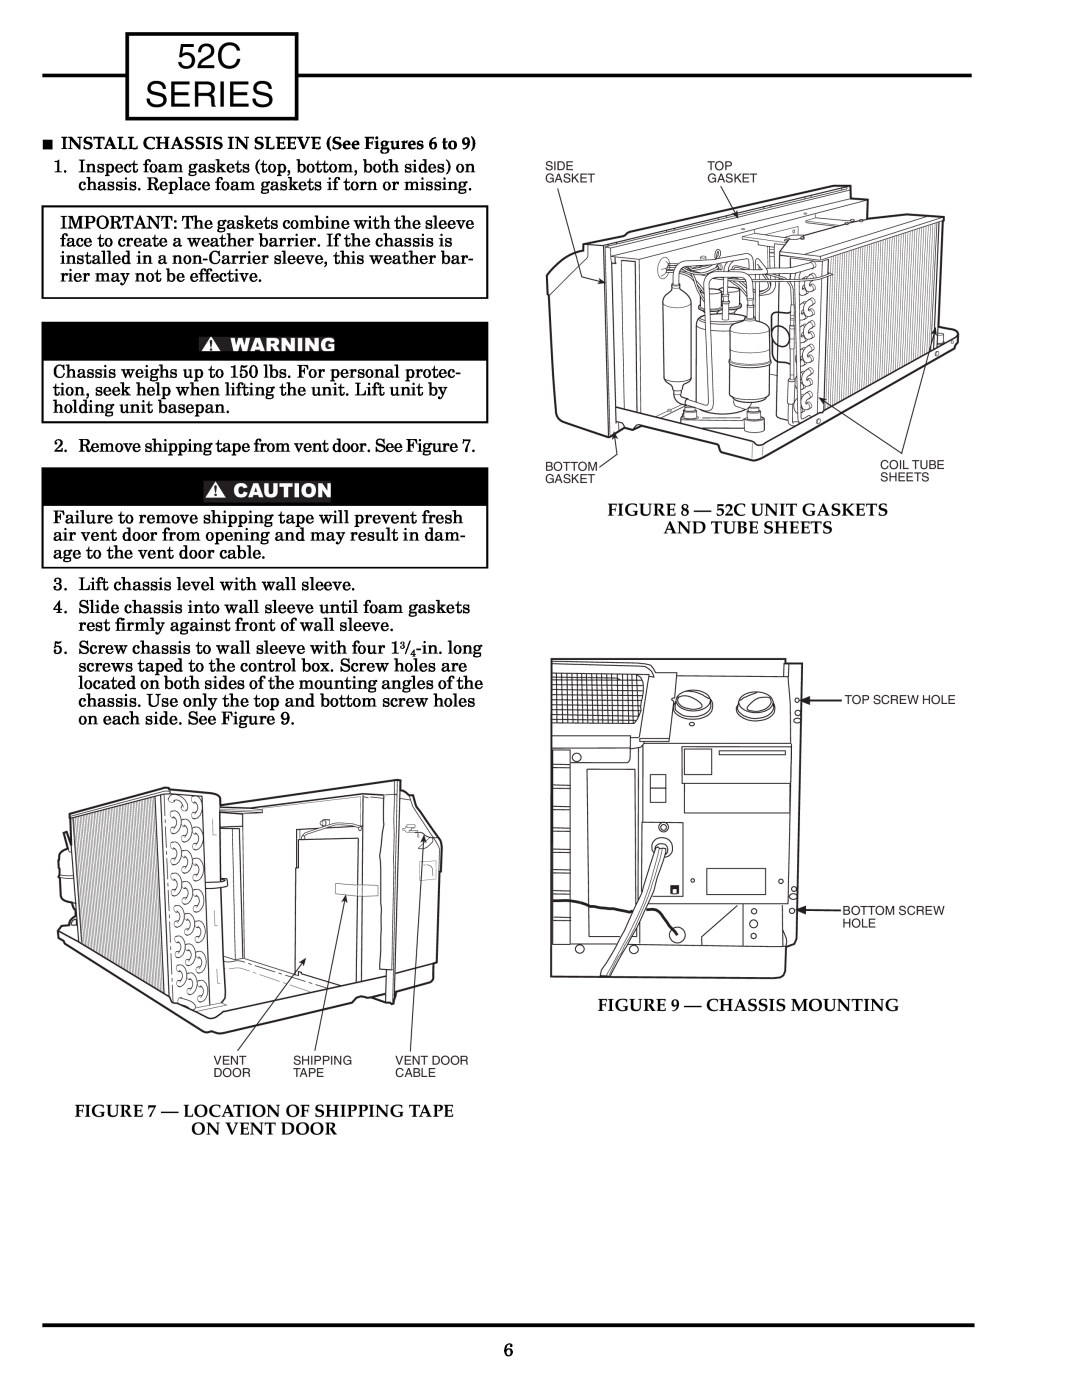 Carrier Access 52C INSTALL CHASSIS IN SLEEVE See Figures 6 to, Location Of Shipping Tape On Vent Door, Chassis Mounting 